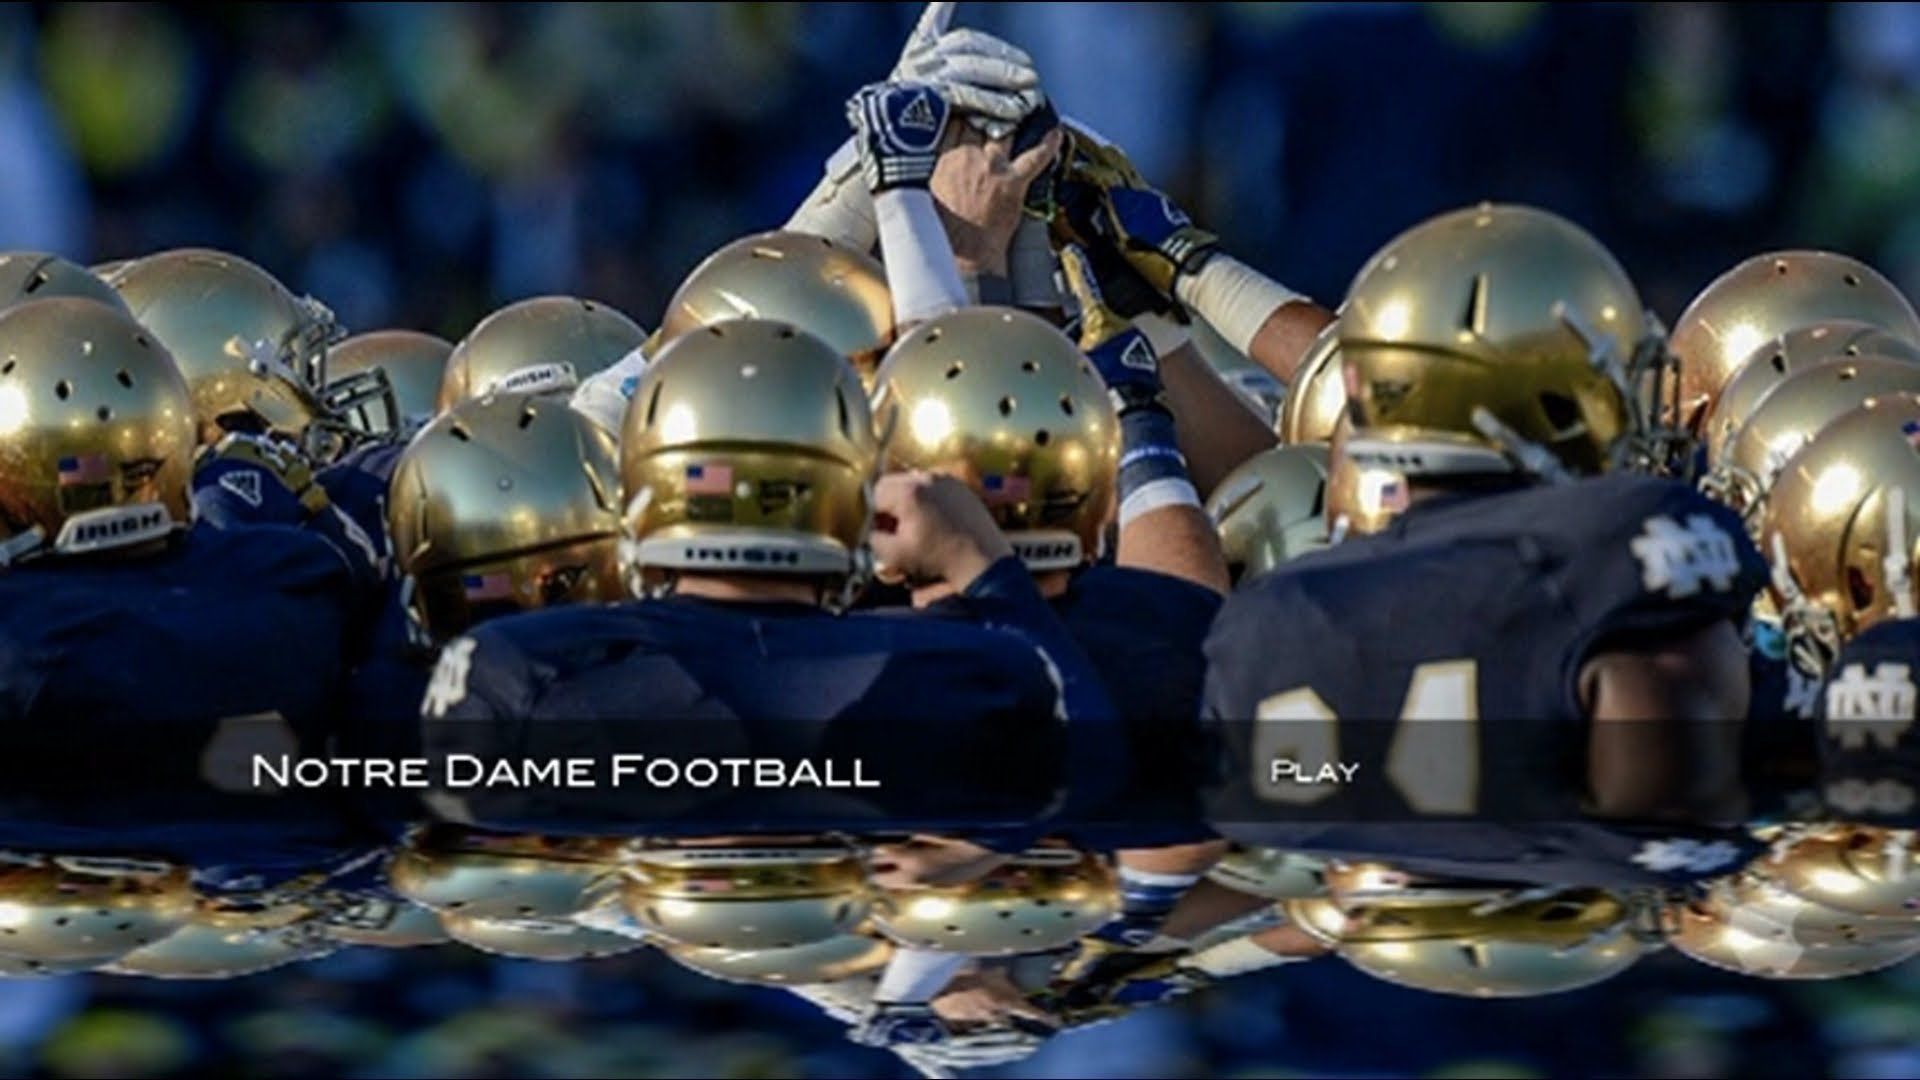 Notre Dame Football Wallpapers | The Art Mad Wallpapers